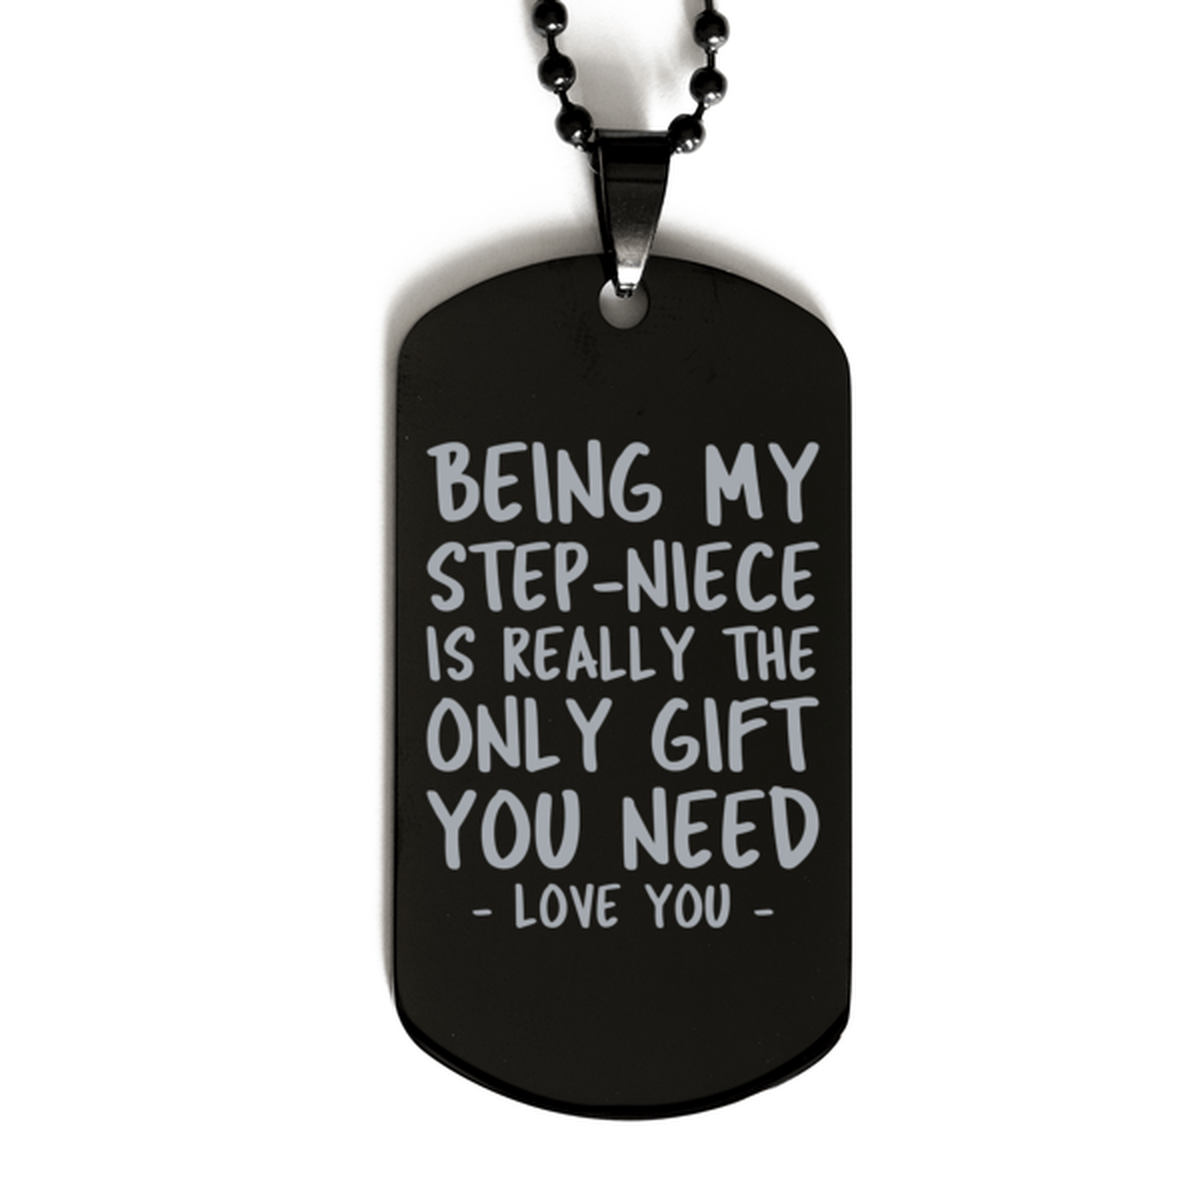 Funny Step-niece Black Dog Tag Necklace, Being My Step-niece Is Really the Only Gift You Need, Best Birthday Gifts for Step-niece